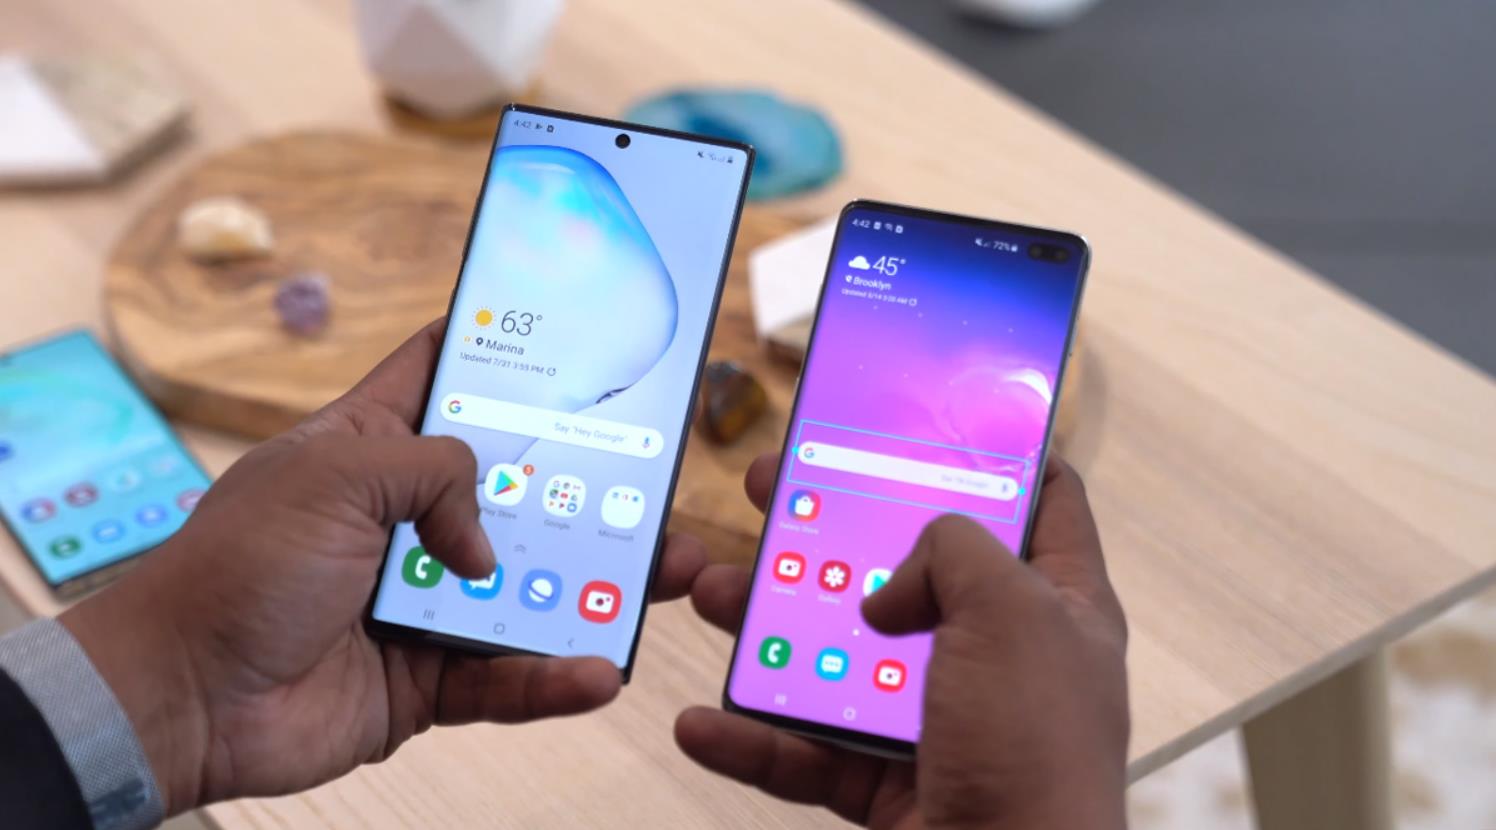 Galaxy Note 10 Vs Galaxy Note 10 Plus: What's The Difference?